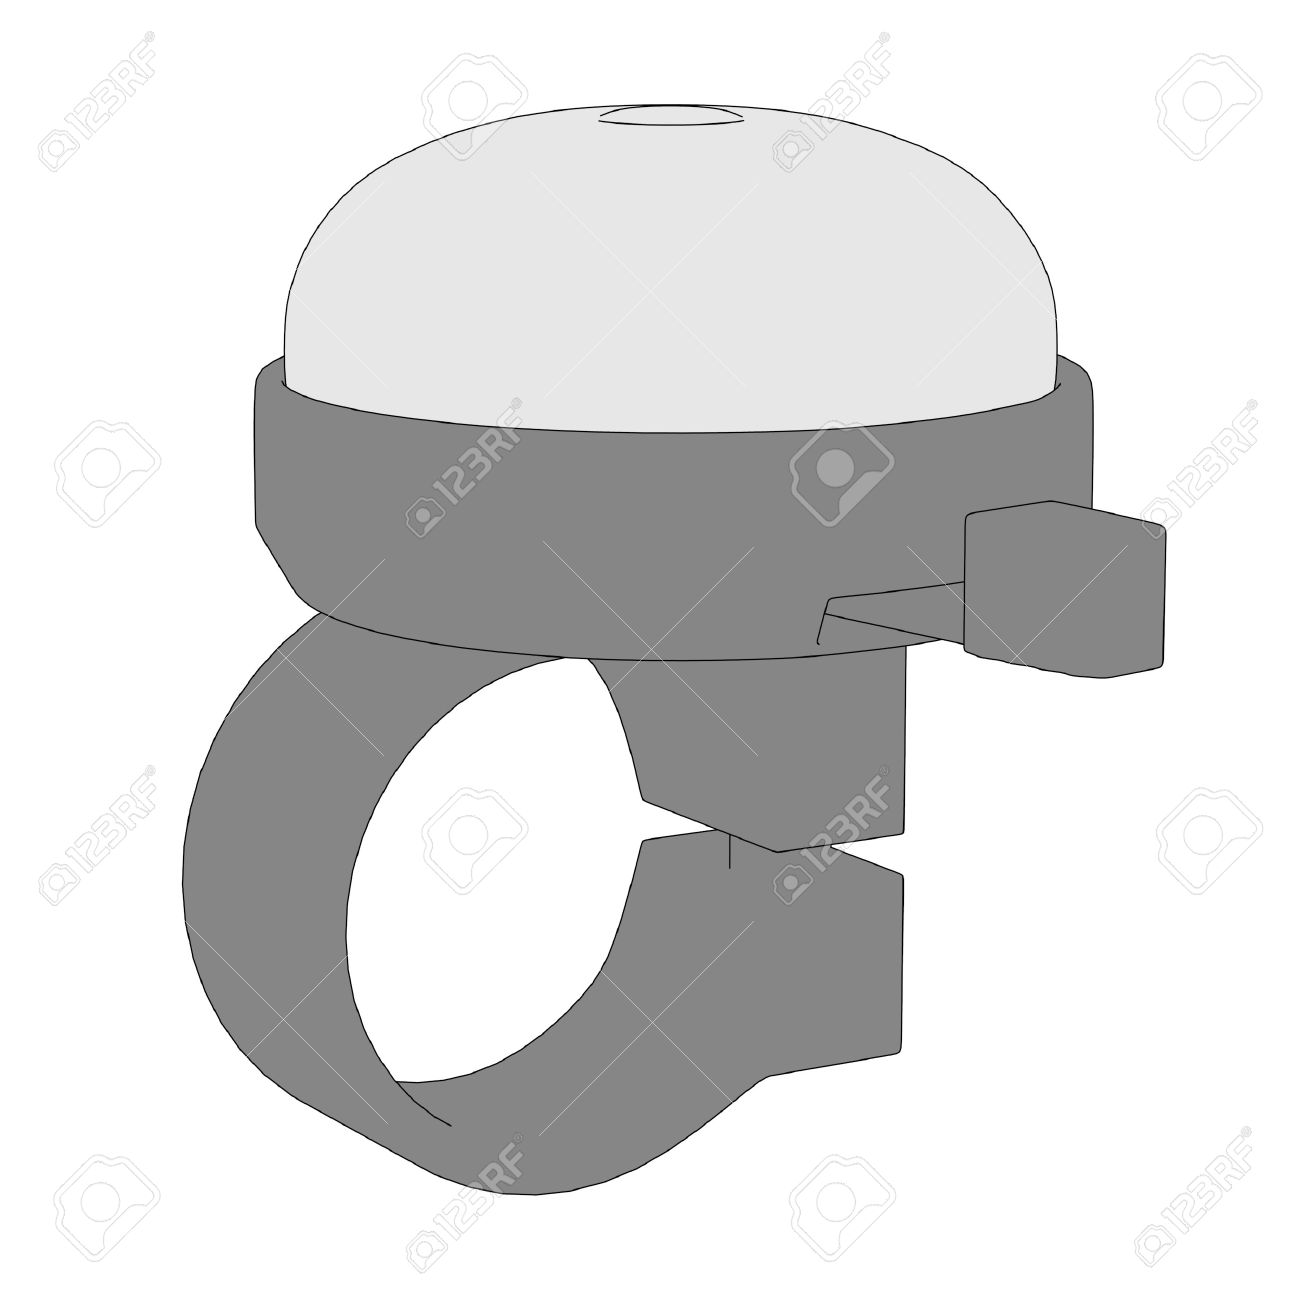 Cartoon Image Of Bicycle Bell Stock Photo, Picture And Royalty.